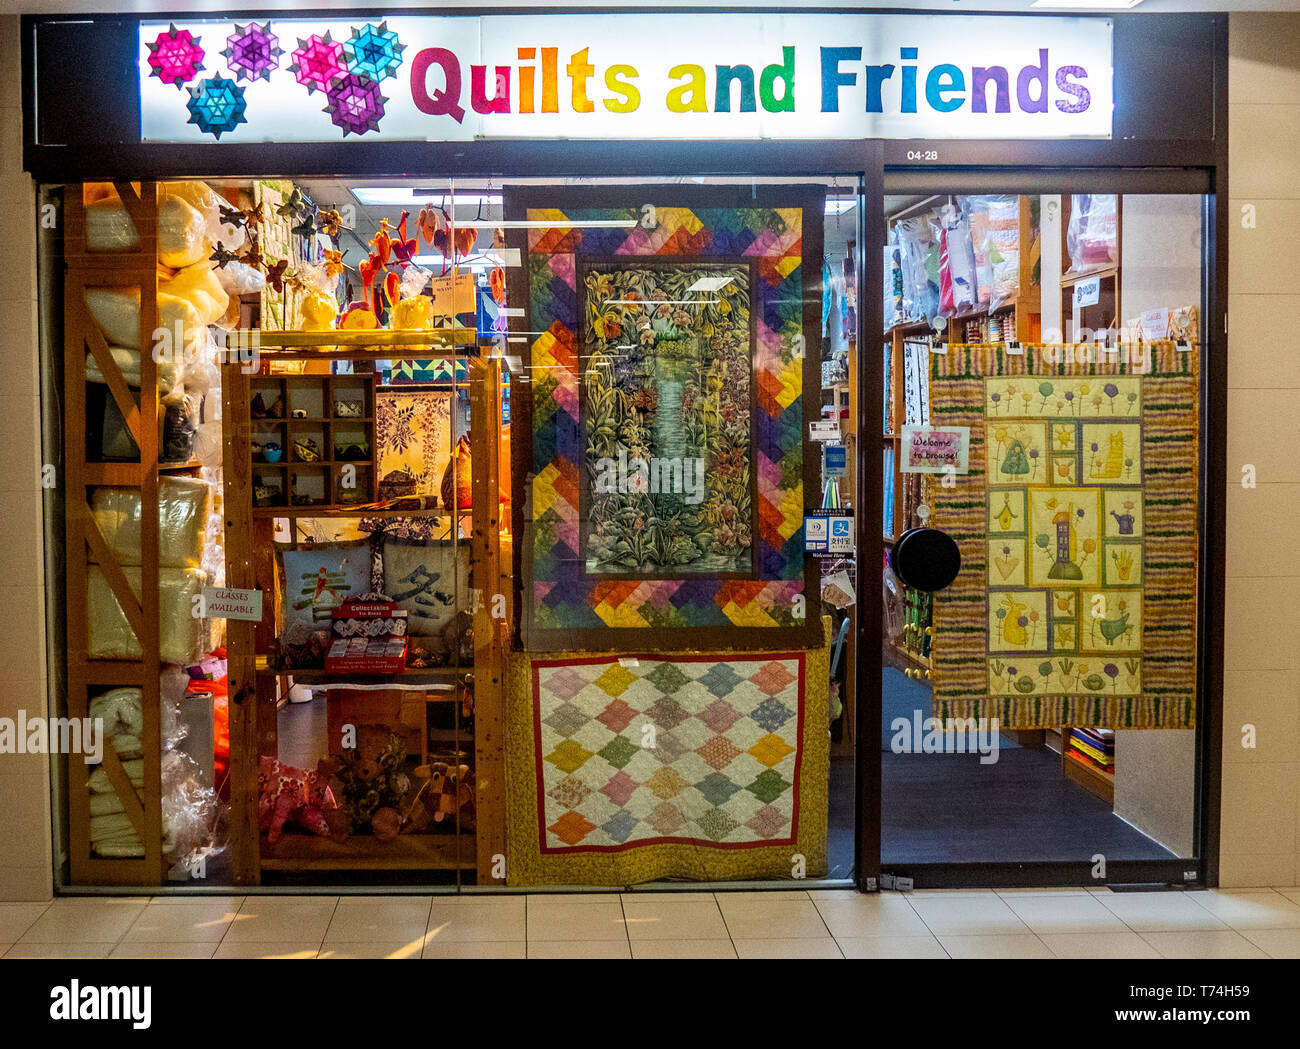 Quilts and Friends a needle craft and textile shop in Singapore Stock Photo